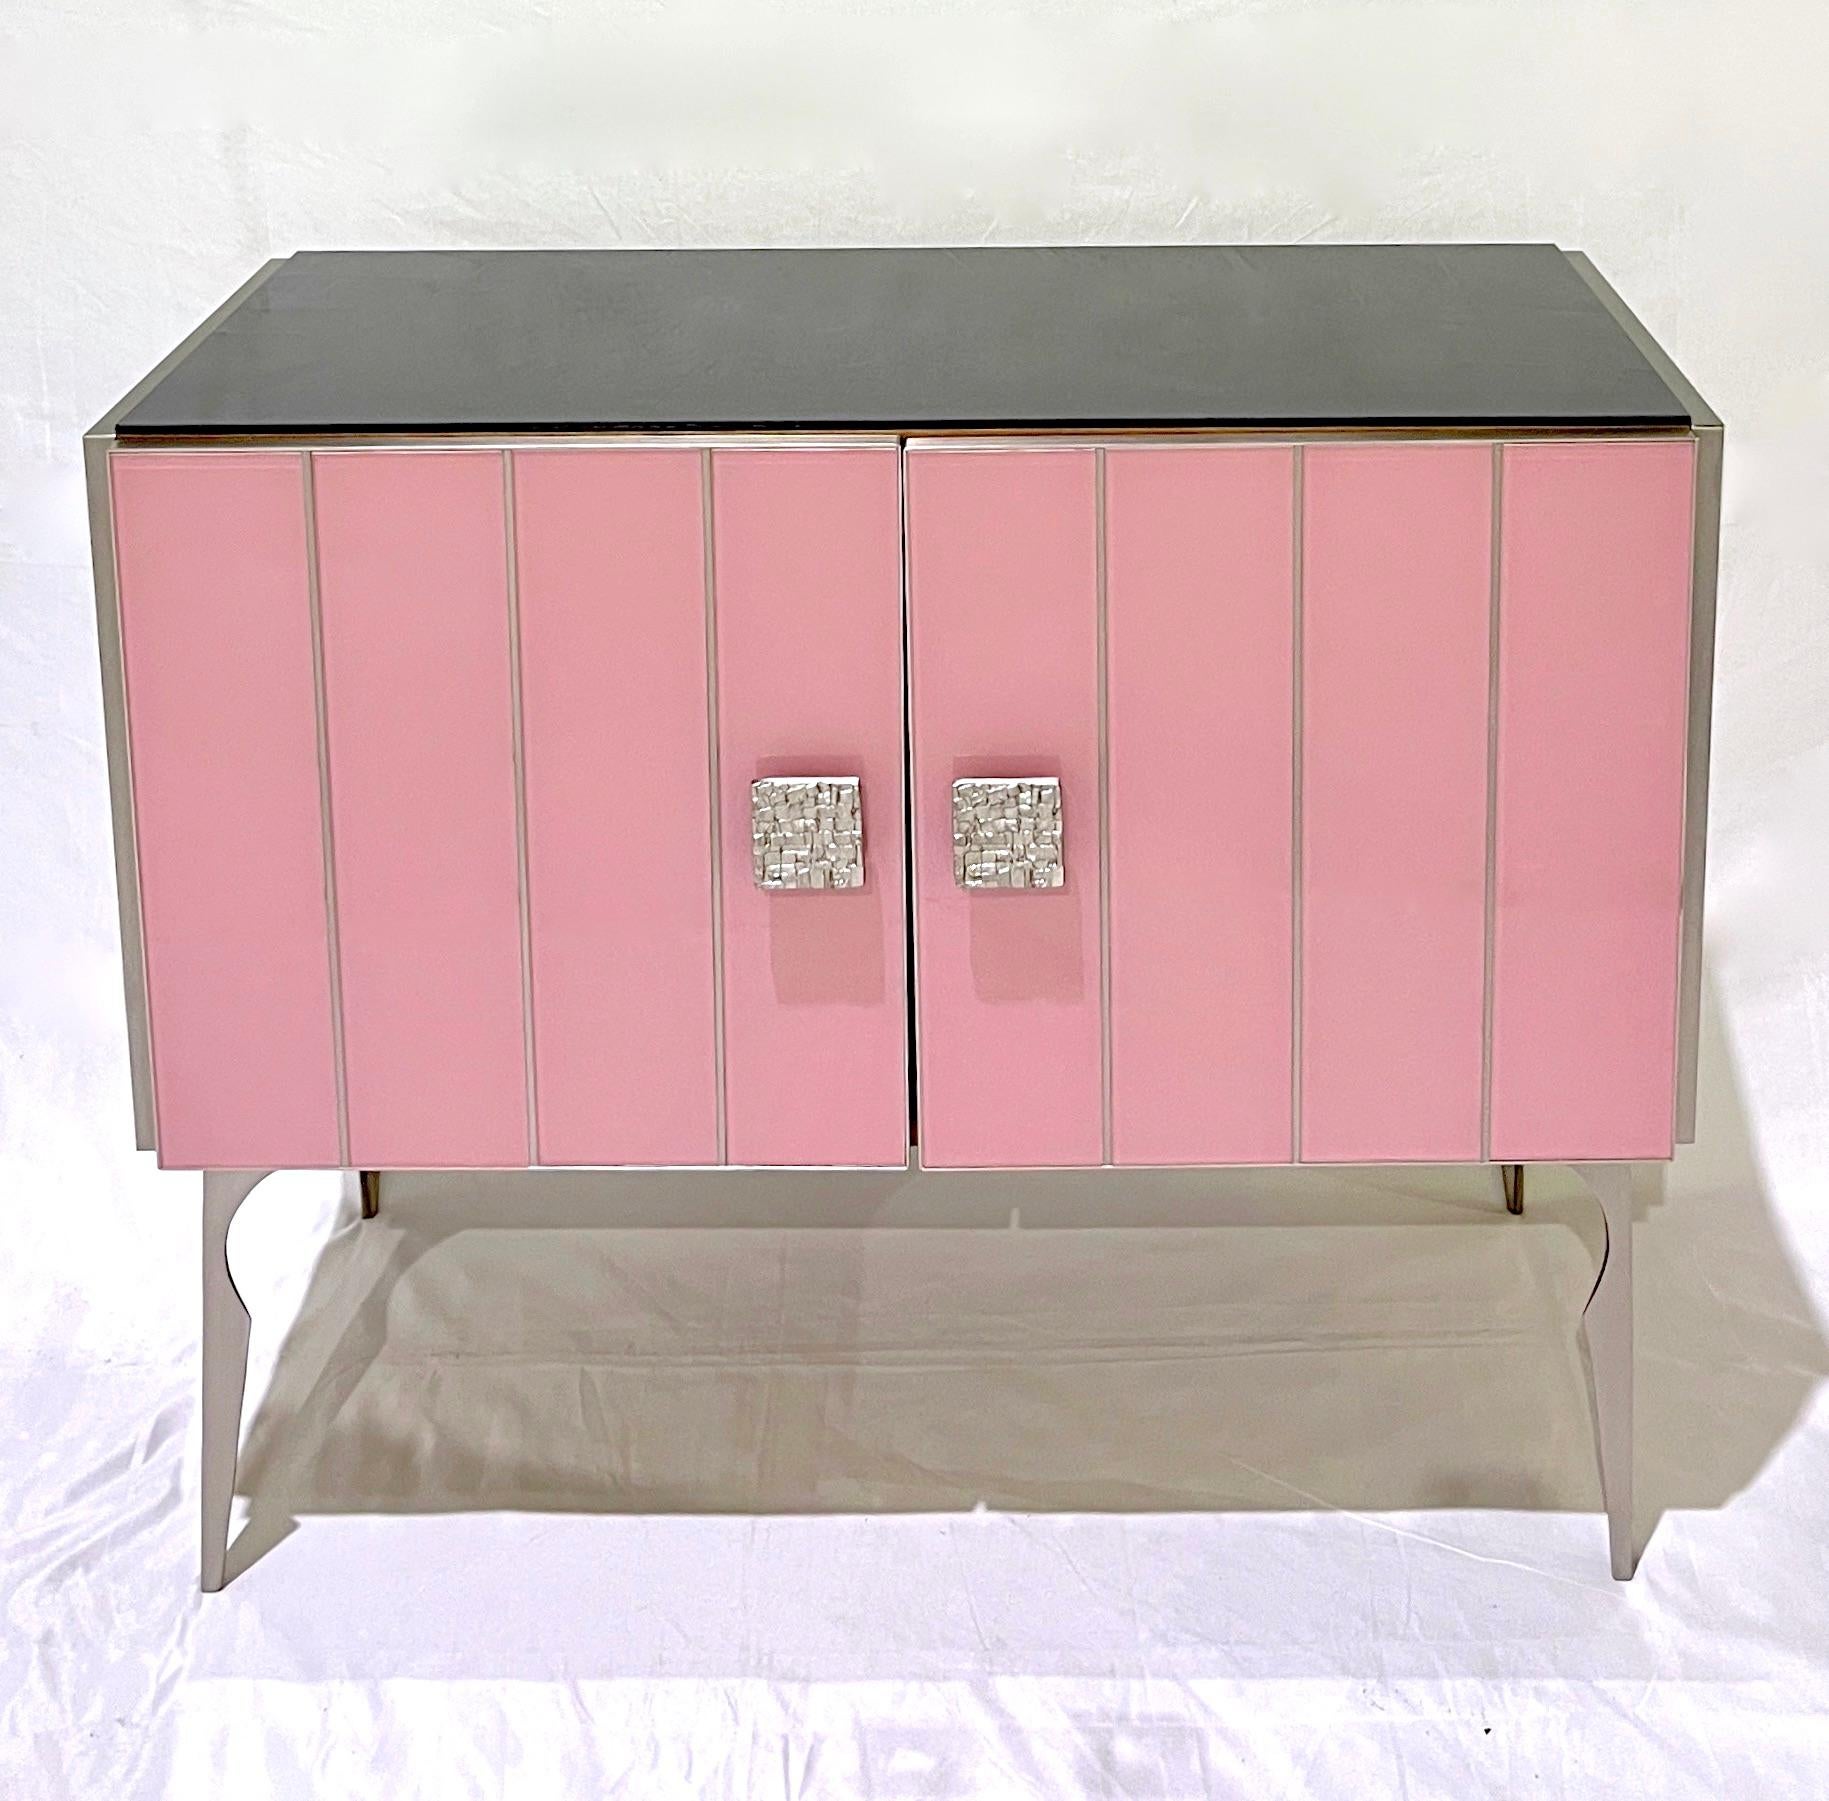 Bring glamour to your room with this bespoke customizable modern cabinet, entirely handcrafted in Italy, with a Hollywood Regency feel. The surround is decorated with art glass in a striking soft pink salmon rose color, striped vertically with satin